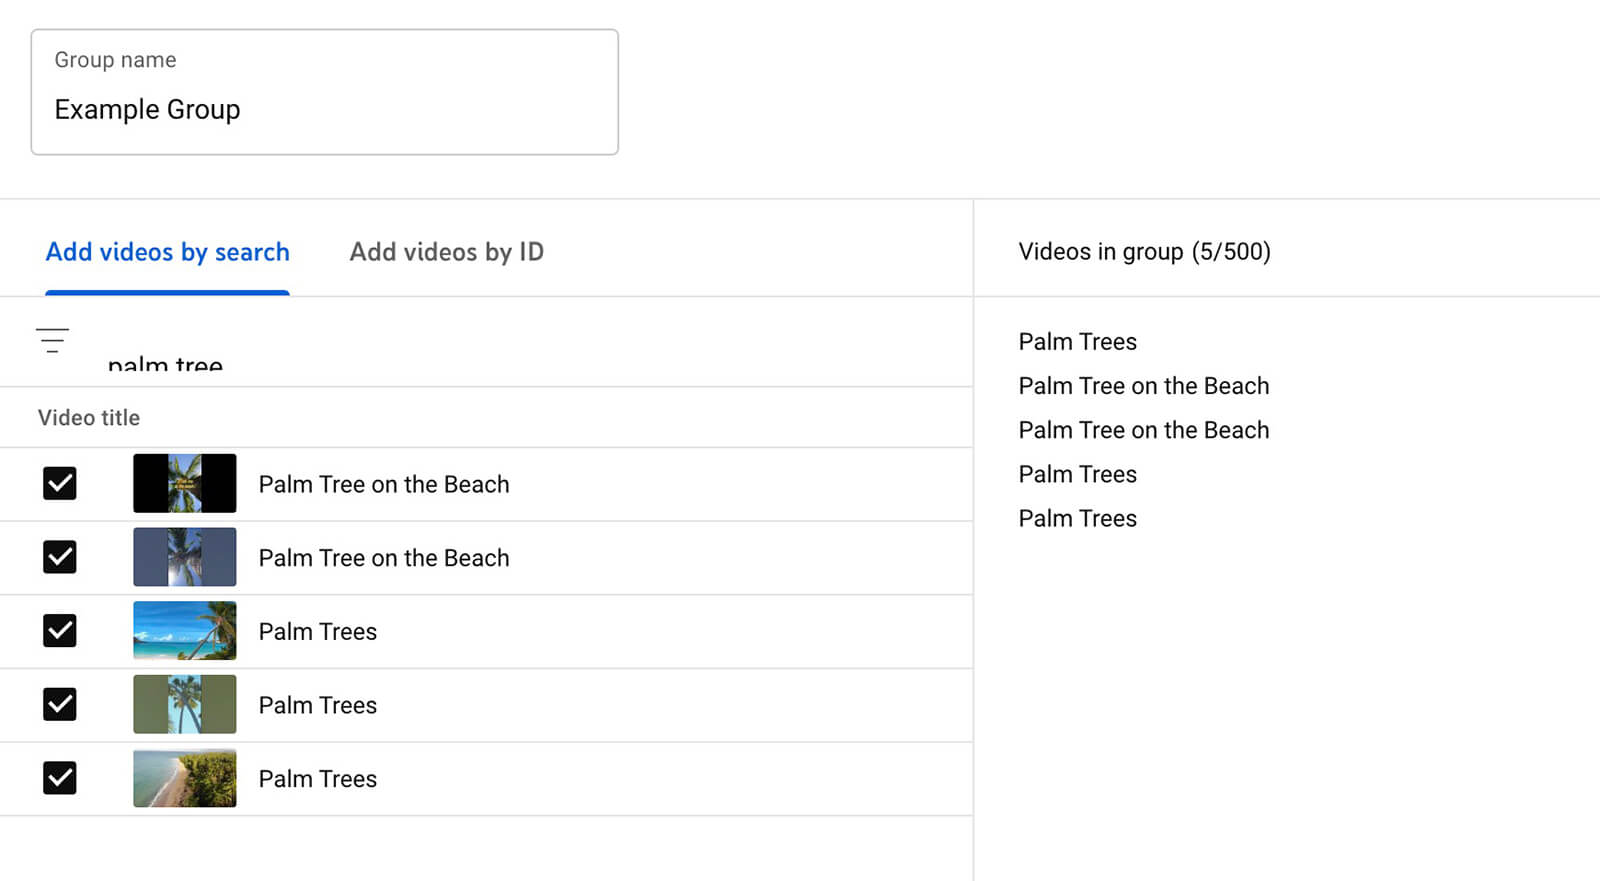 youtube-analytics-groups-advanced-mode-add-videos-by-search-into-groups-3